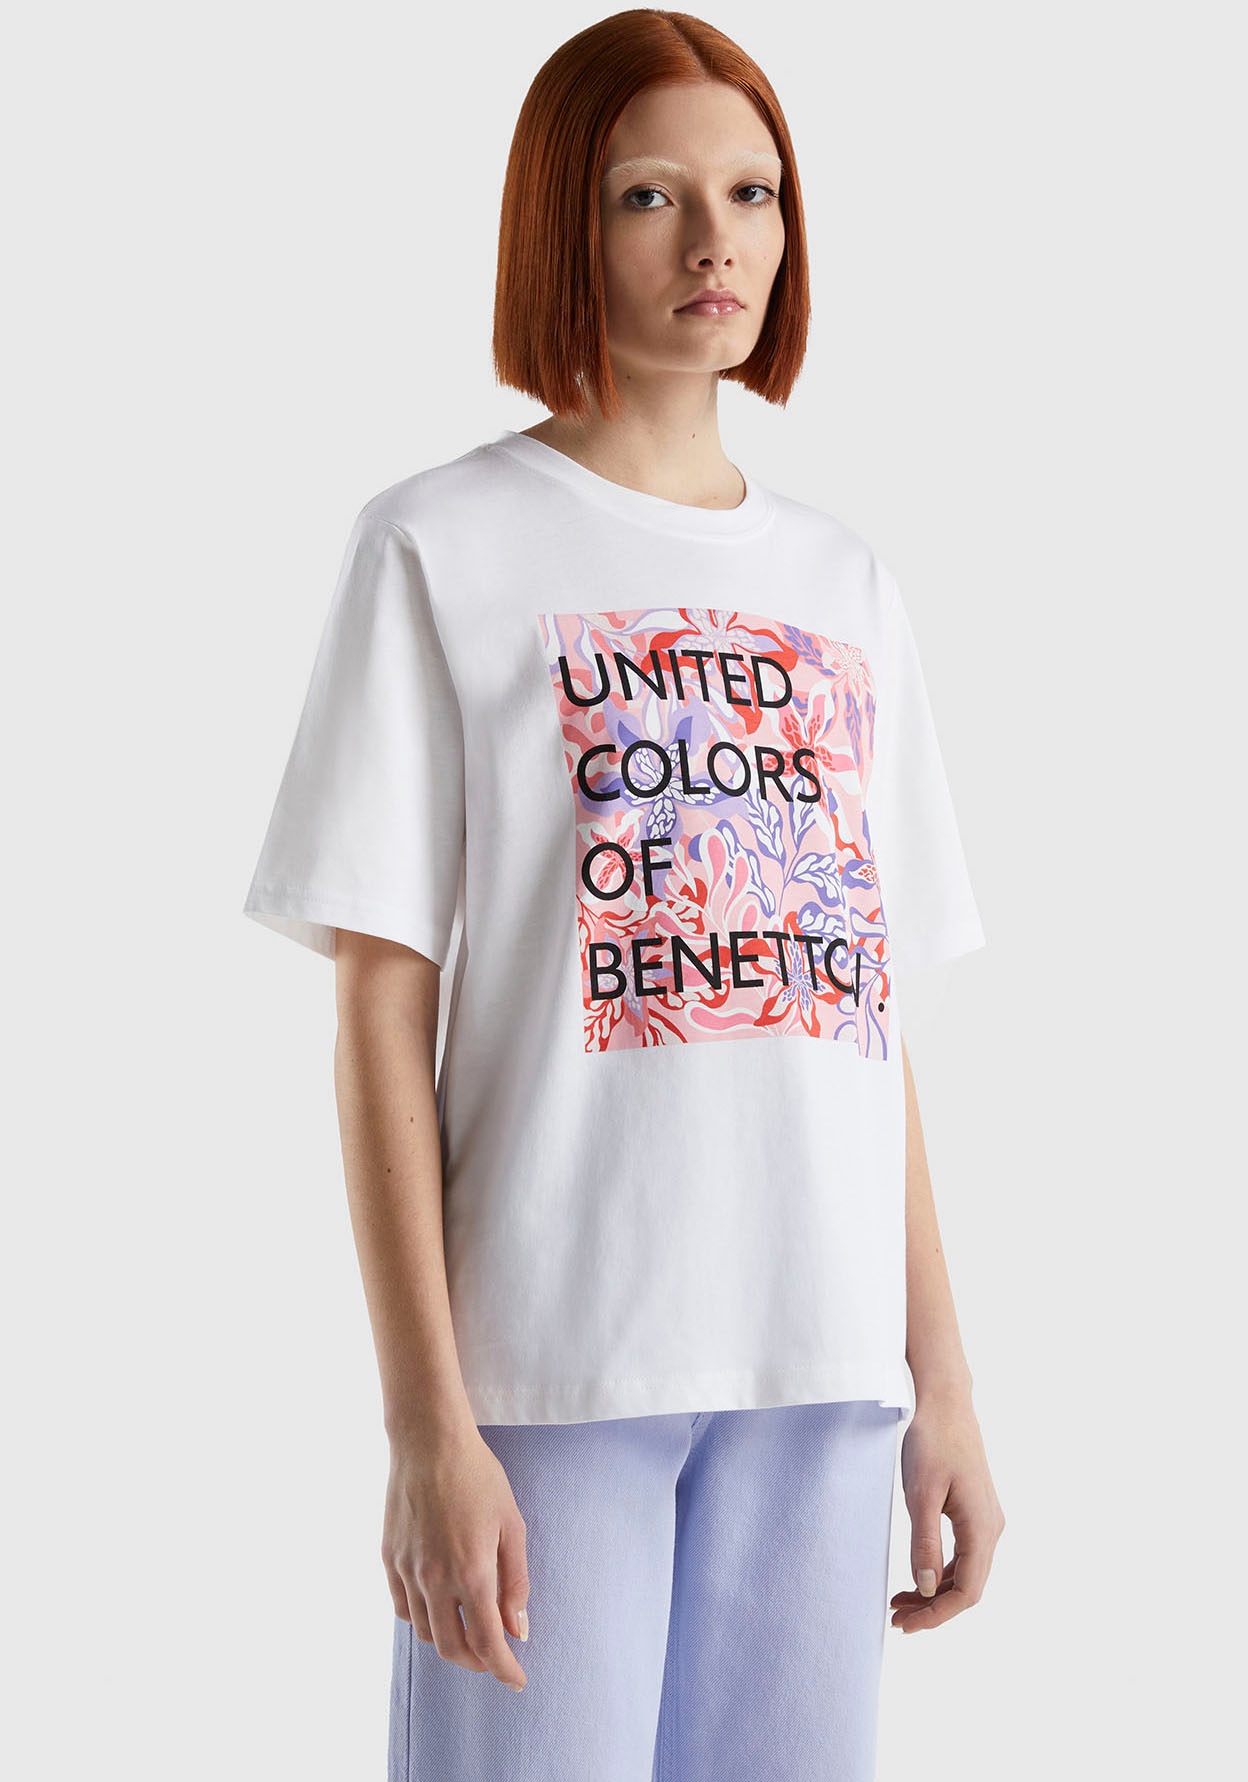 United Colors of T-Shirt bei ♕ Benetton